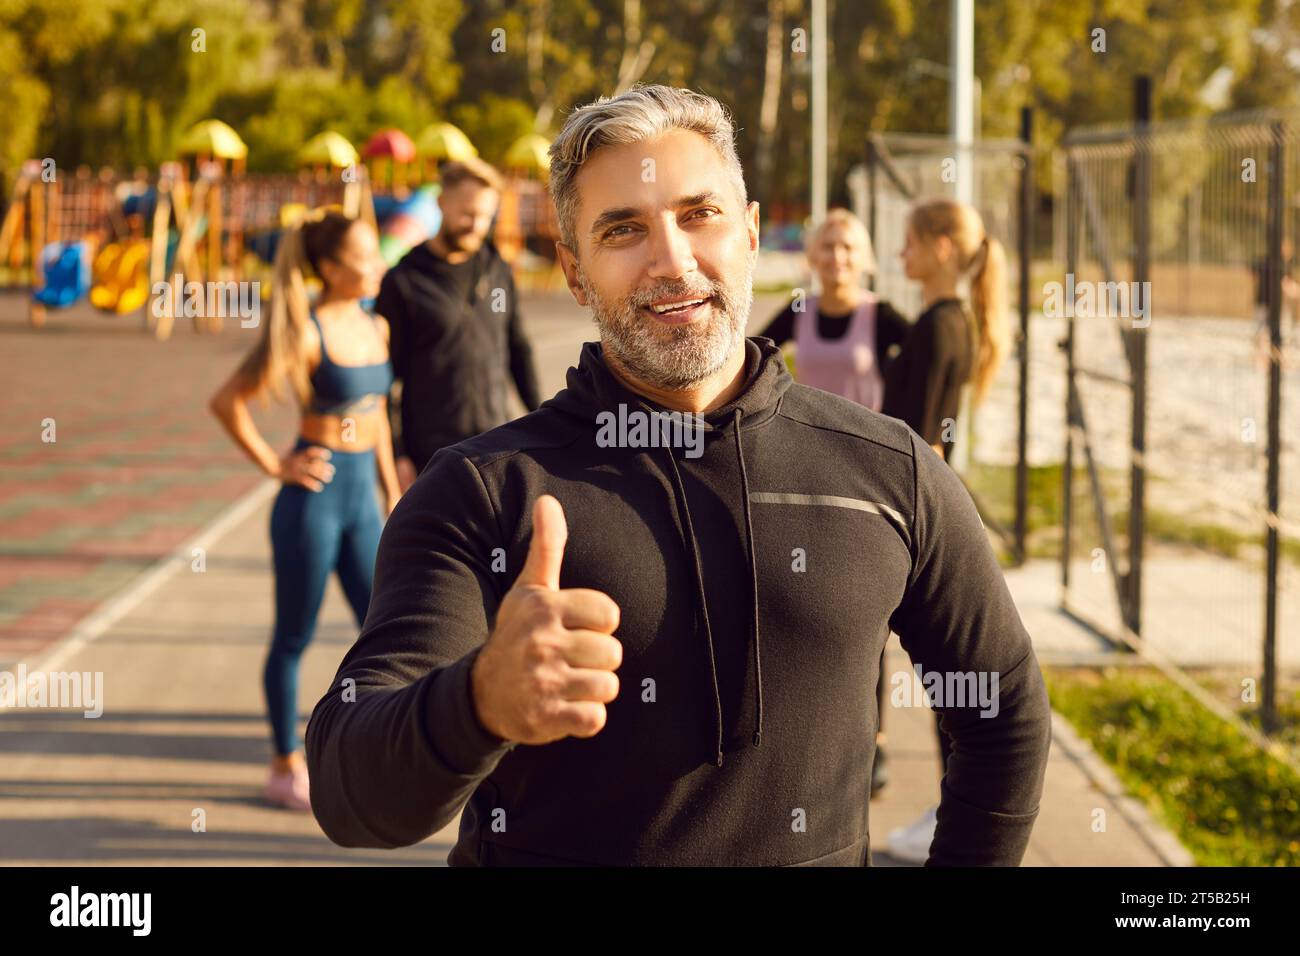 Happy man looking at camera showing thumb up sign after sport fit exercises in the park in nature. Stock Photo